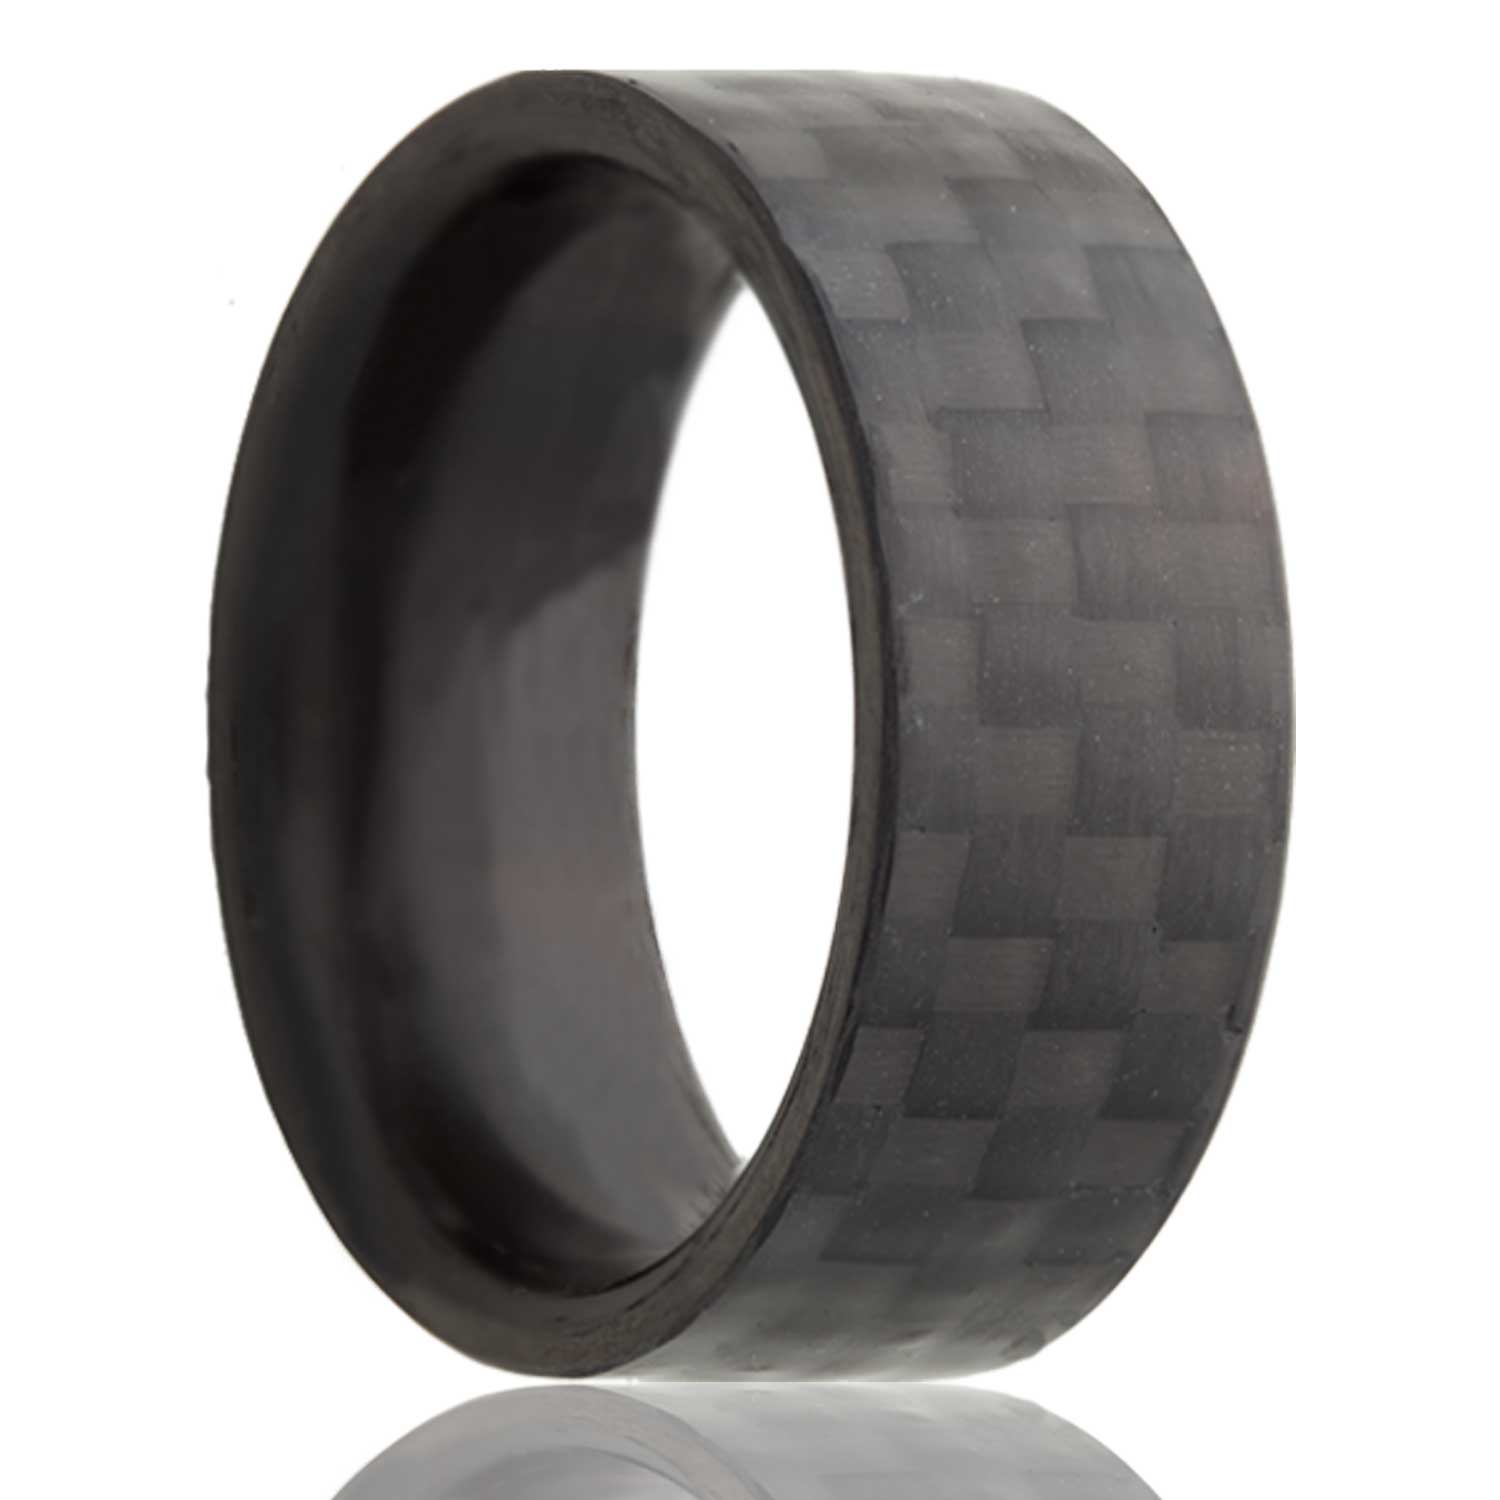 A classic carbon fiber wedding band displayed on a neutral white background.